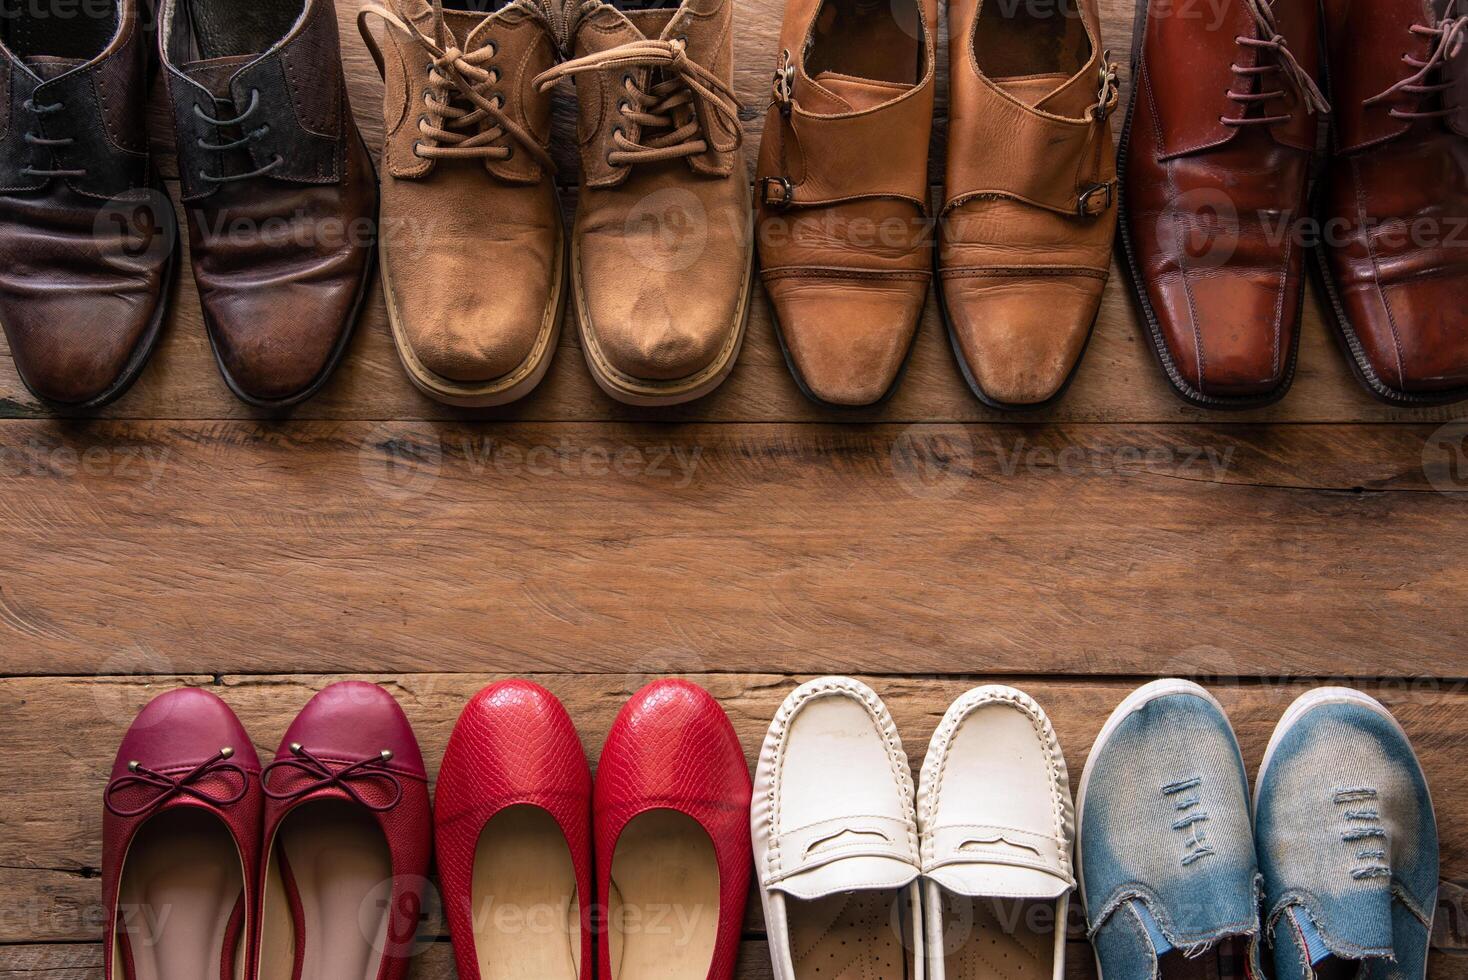 shoes with men and women various styles on a wooden floor - lifestyles. photo